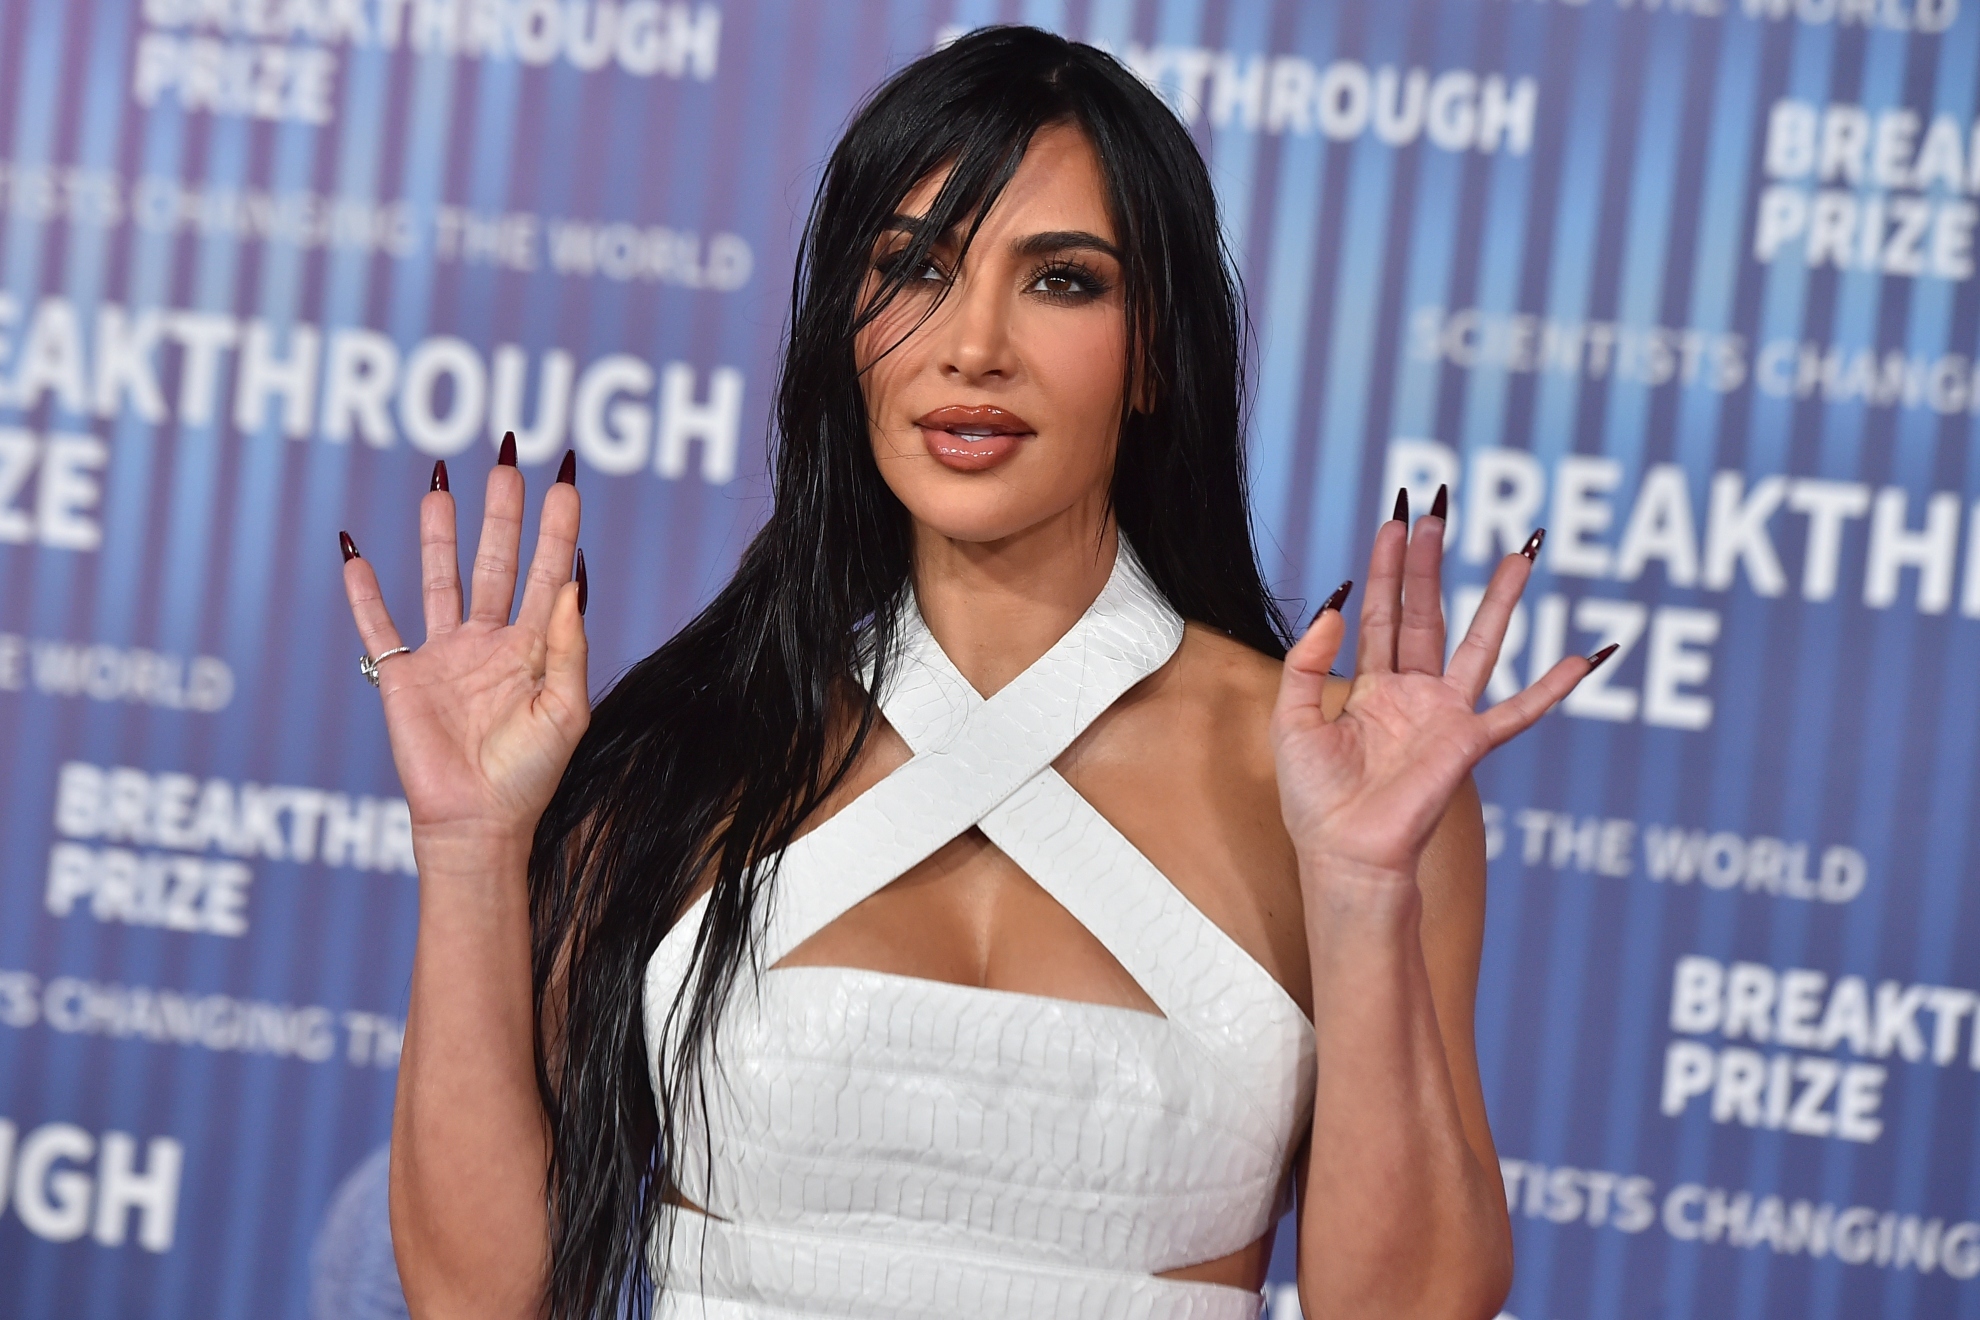 Kim K spills the coffee beans: What does she do with her morning pick me up?